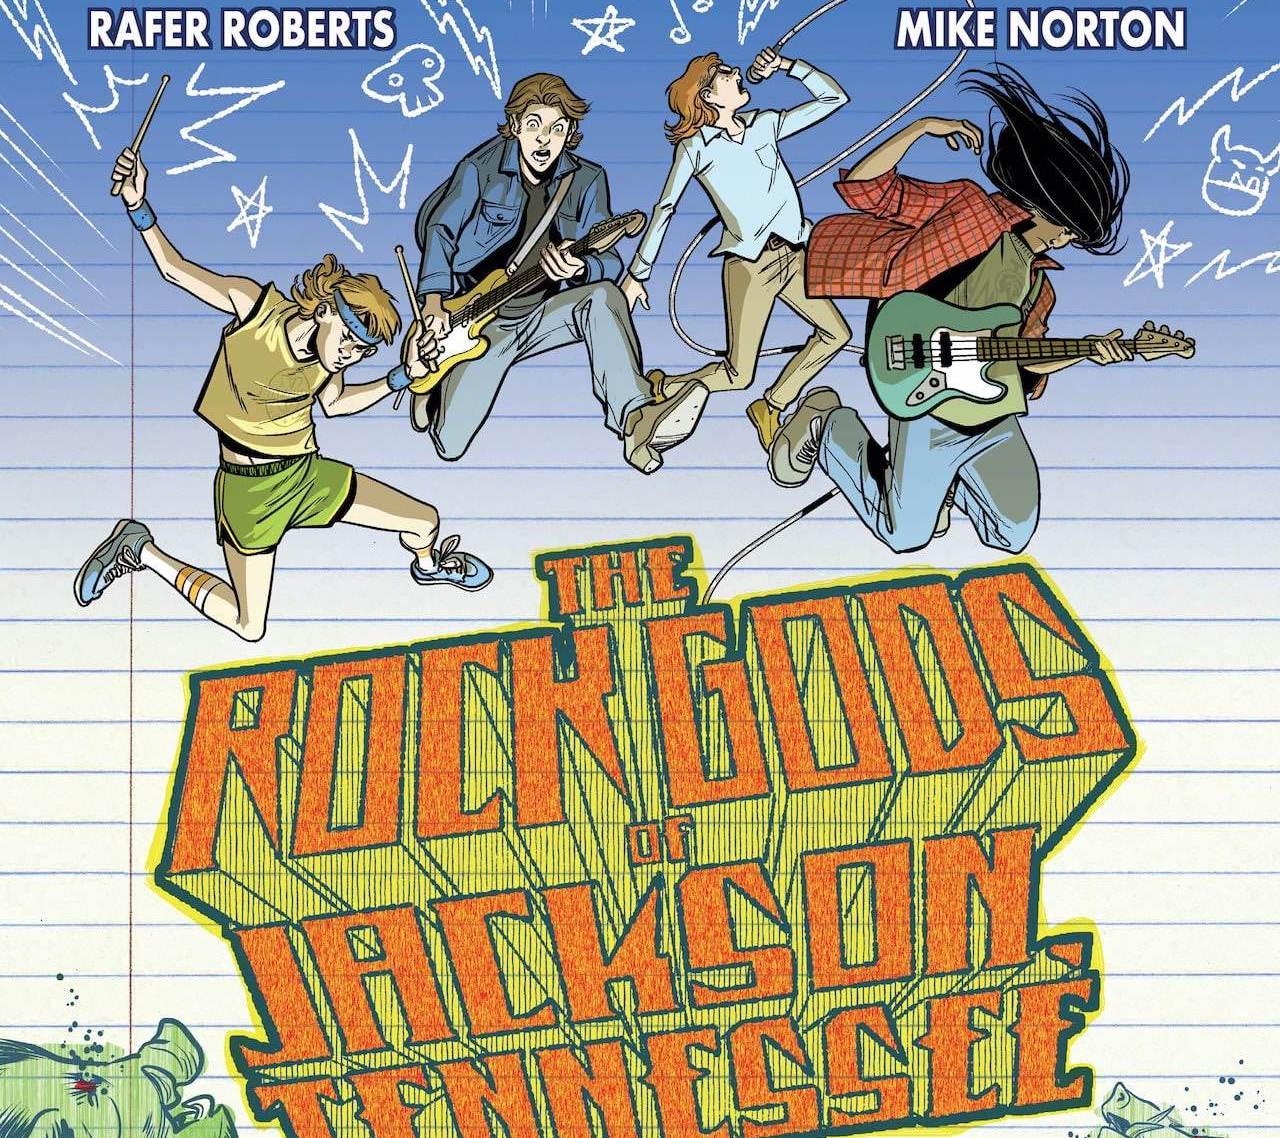 Action, adventure, horror, and humor combine in 'The Rock Gods of Jackson, Tennessee'